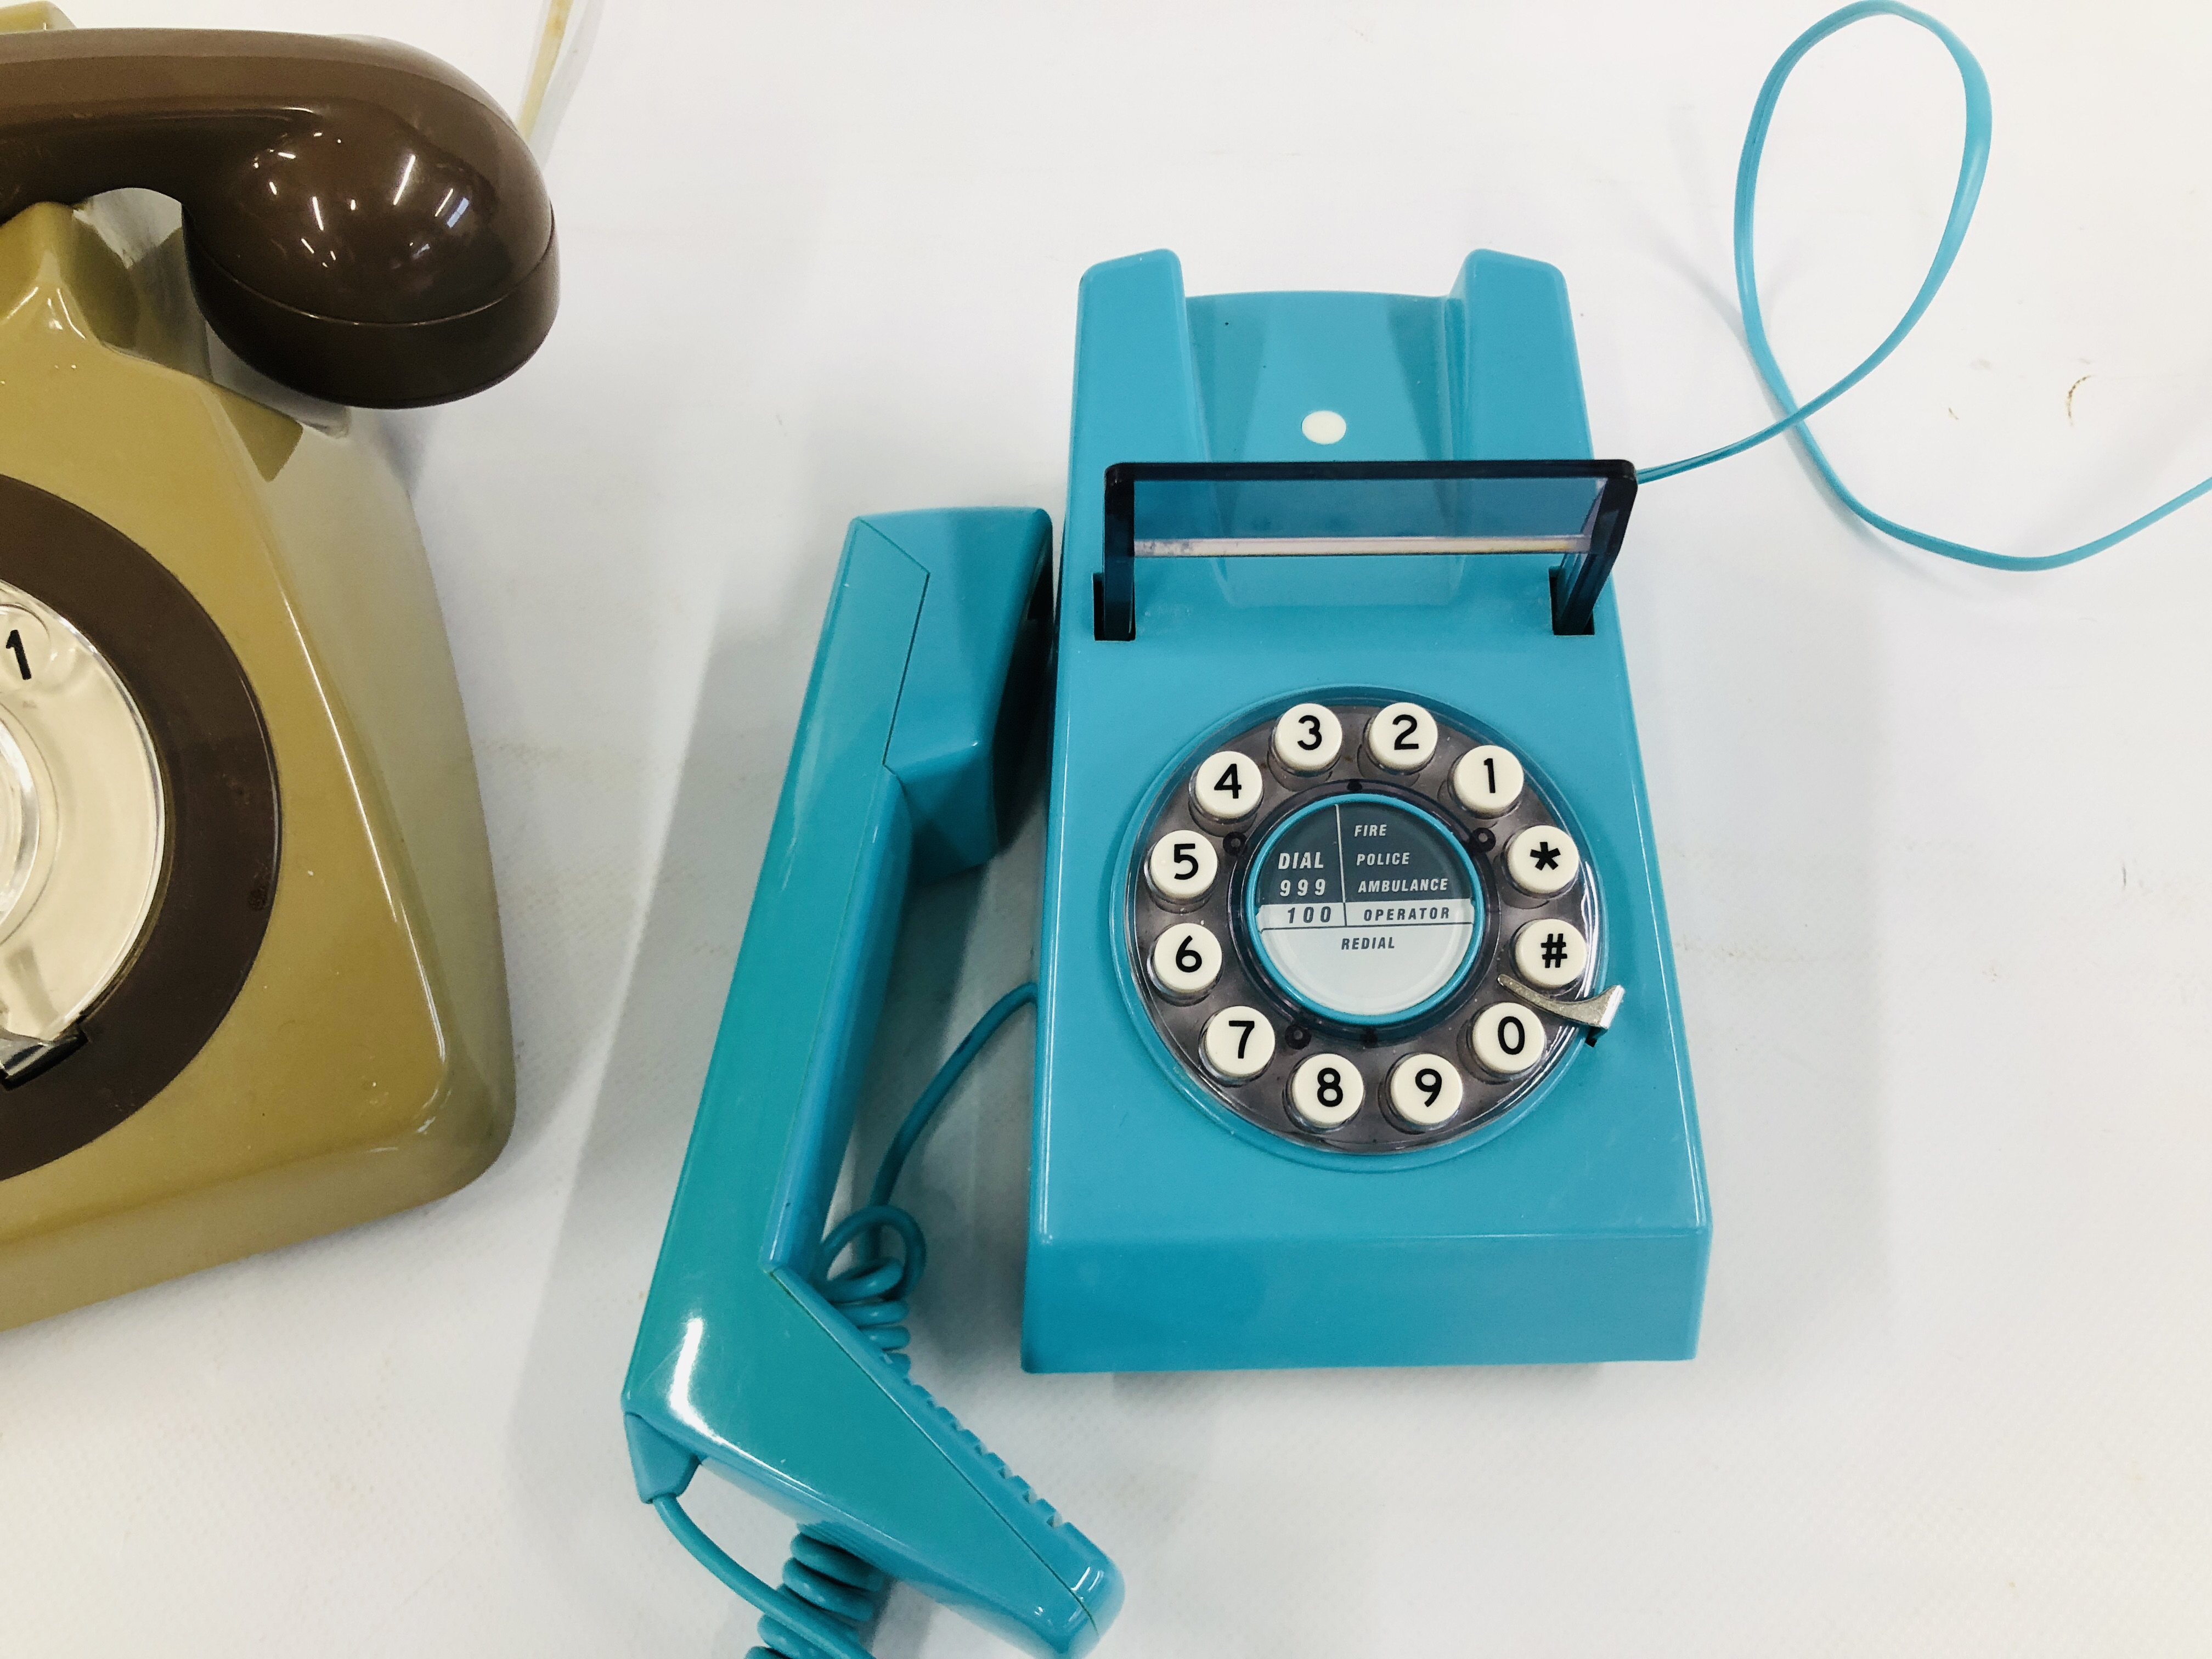 A VINTAGE TELEPHONE AND VINTAGE STYLE TRIMPHONE TELEPHONE - Image 3 of 5